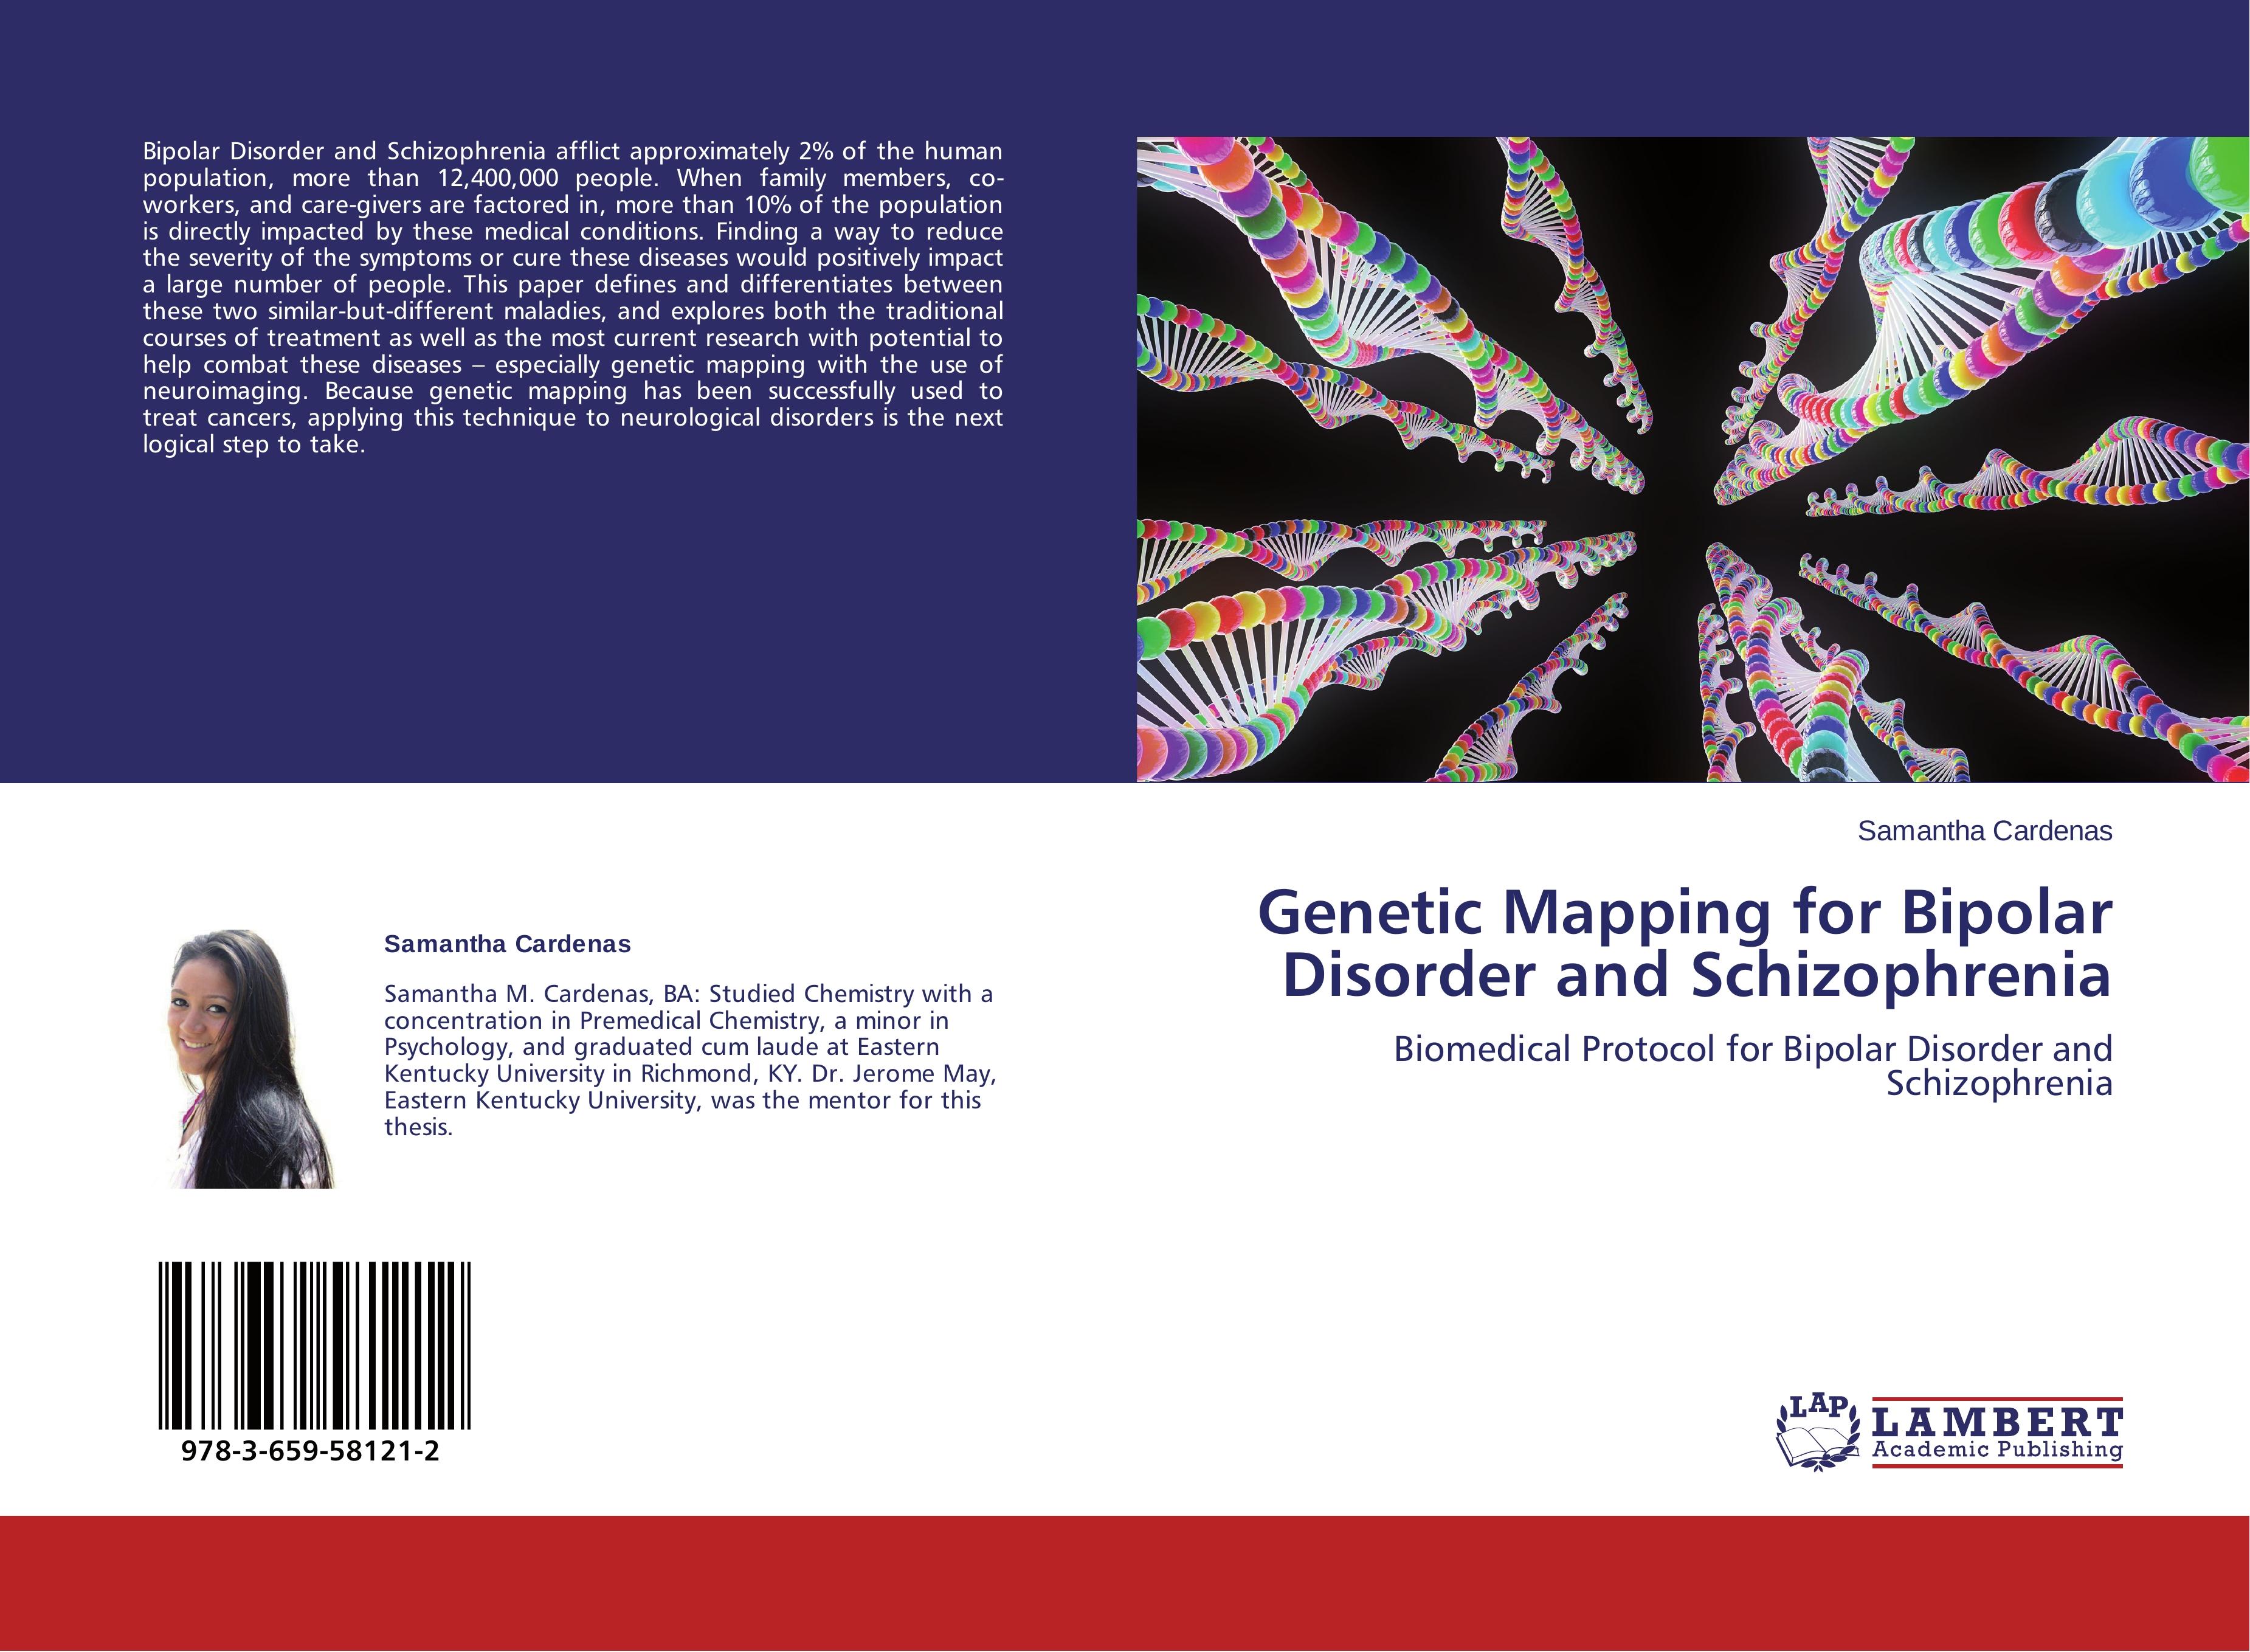 Genetic Mapping for Bipolar Disorder and Schizophrenia - Samantha Cardenas